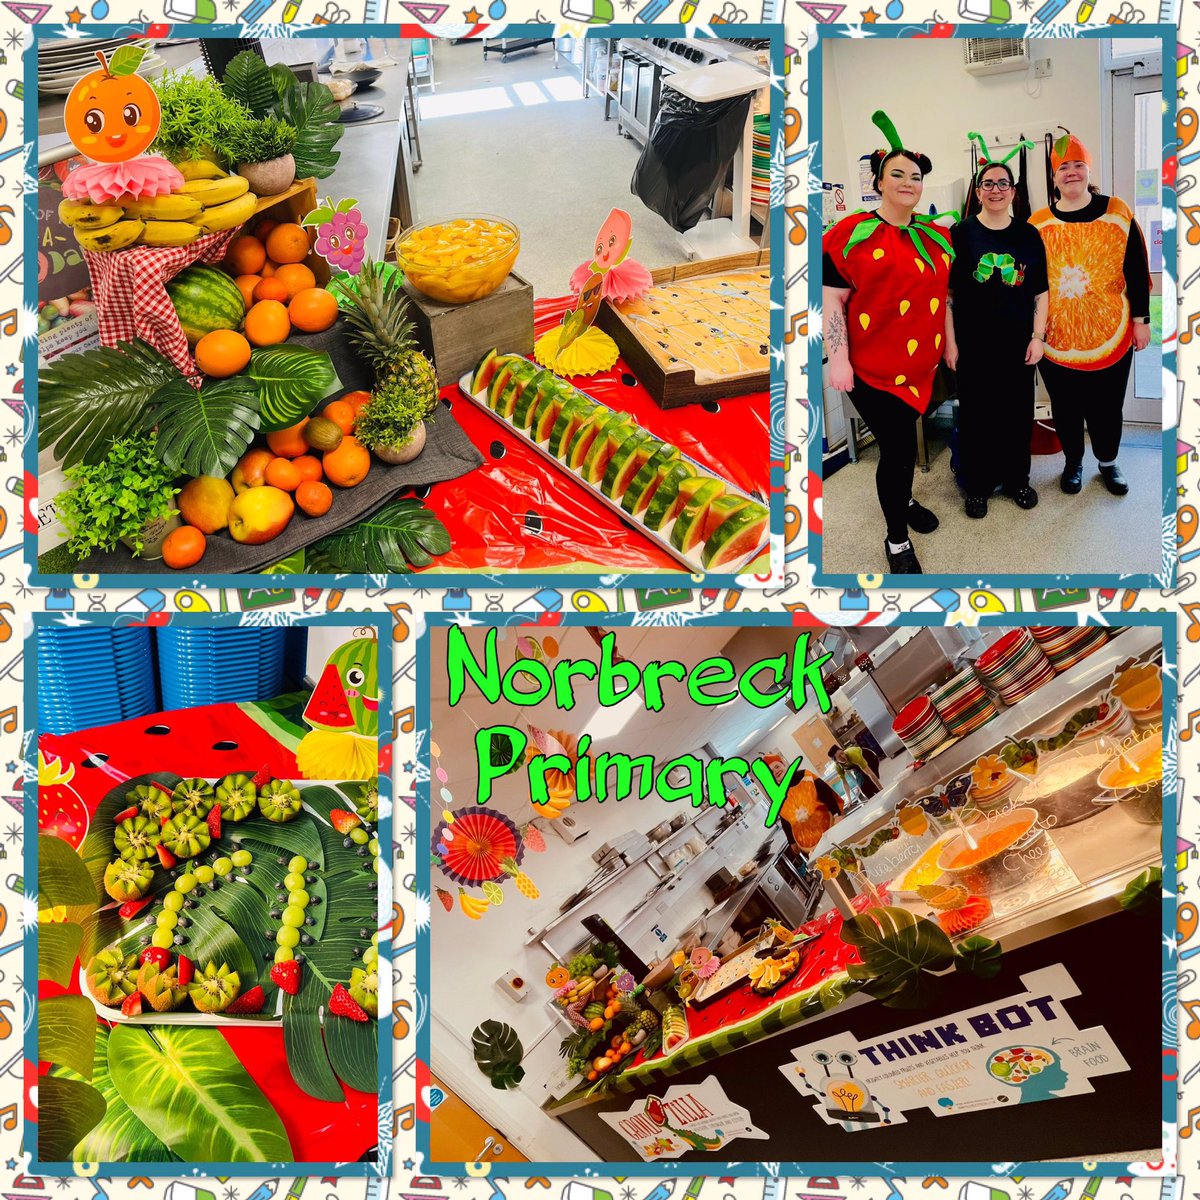 Celebrating World book day at Norbreck primary- what a treat all round!! 👍🥳 @mellorscatering @mrtonybaloni @marklyons151162 @Andrew_W4 @JohnCP_Connolly @Jackier50345470 @nugent_nicola